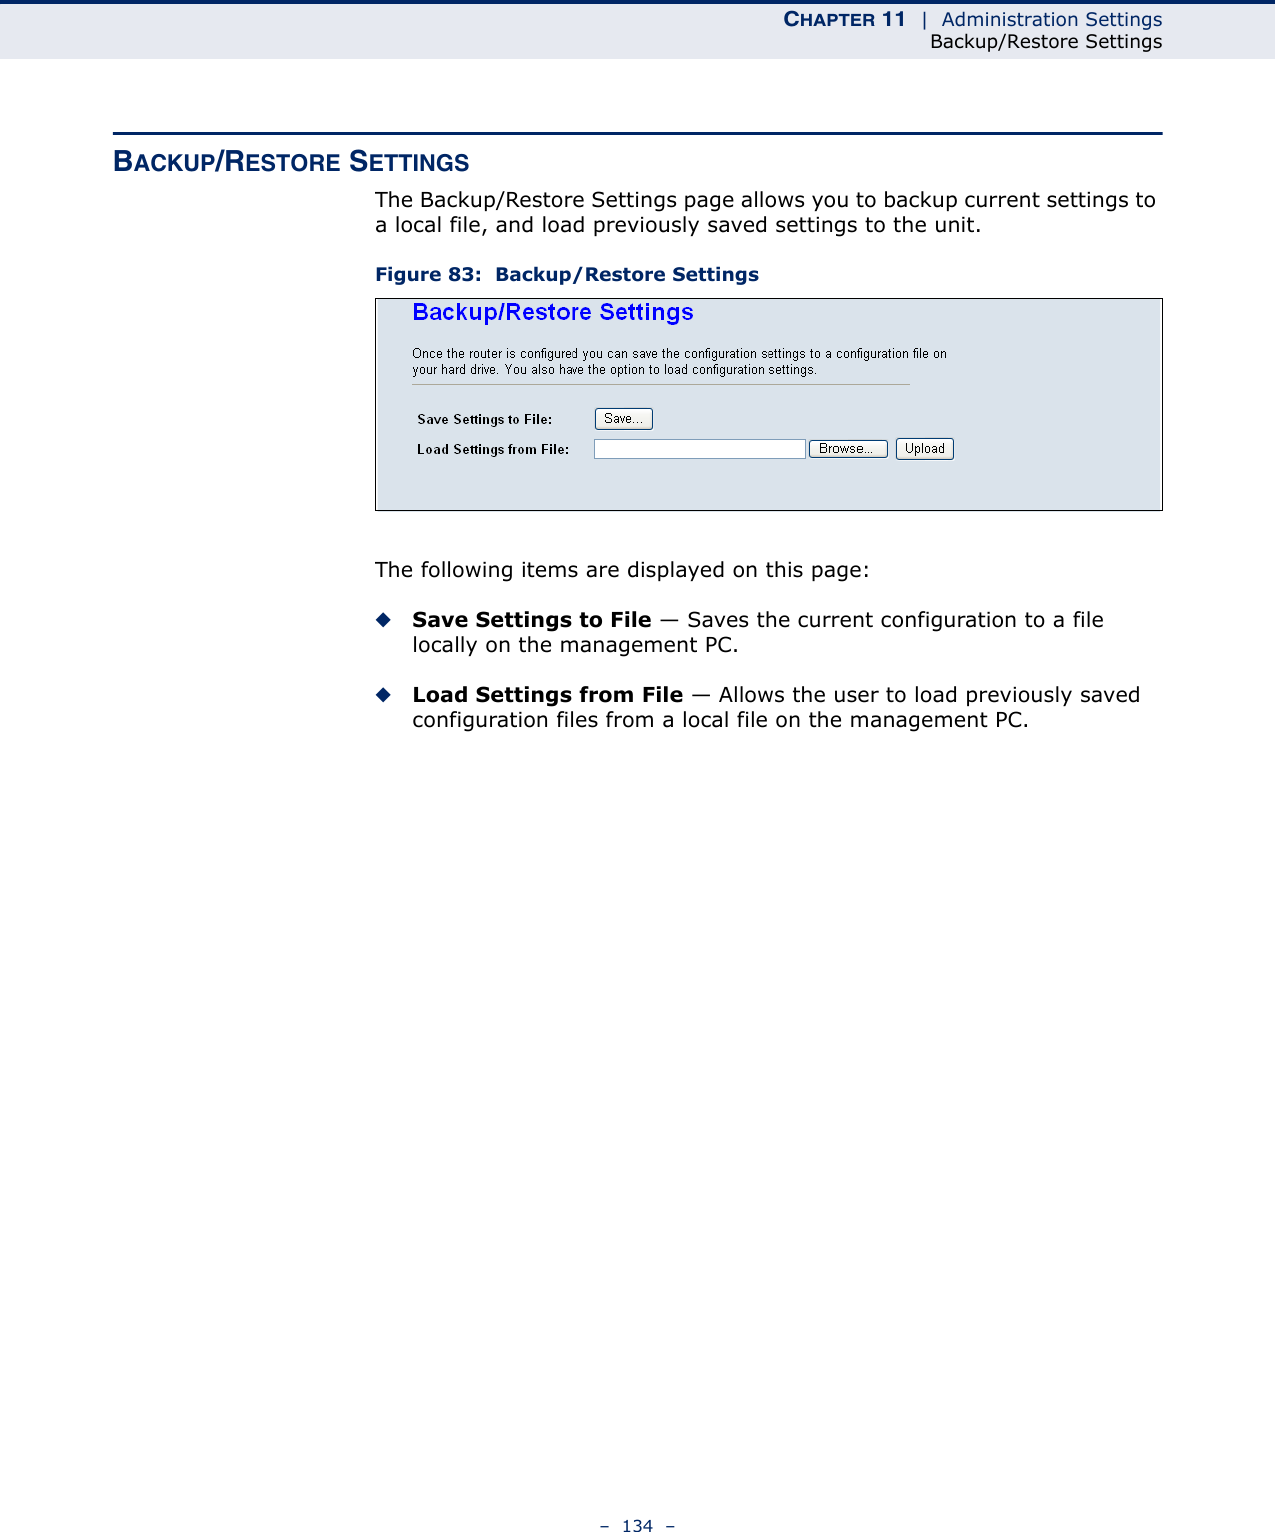 CHAPTER 11  |  Administration SettingsBackup/Restore Settings–  134  –BACKUP/RESTORE SETTINGSThe Backup/Restore Settings page allows you to backup current settings to a local file, and load previously saved settings to the unit.Figure 83:  Backup/Restore SettingsThe following items are displayed on this page:◆Save Settings to File — Saves the current configuration to a file locally on the management PC.◆Load Settings from File — Allows the user to load previously saved configuration files from a local file on the management PC.